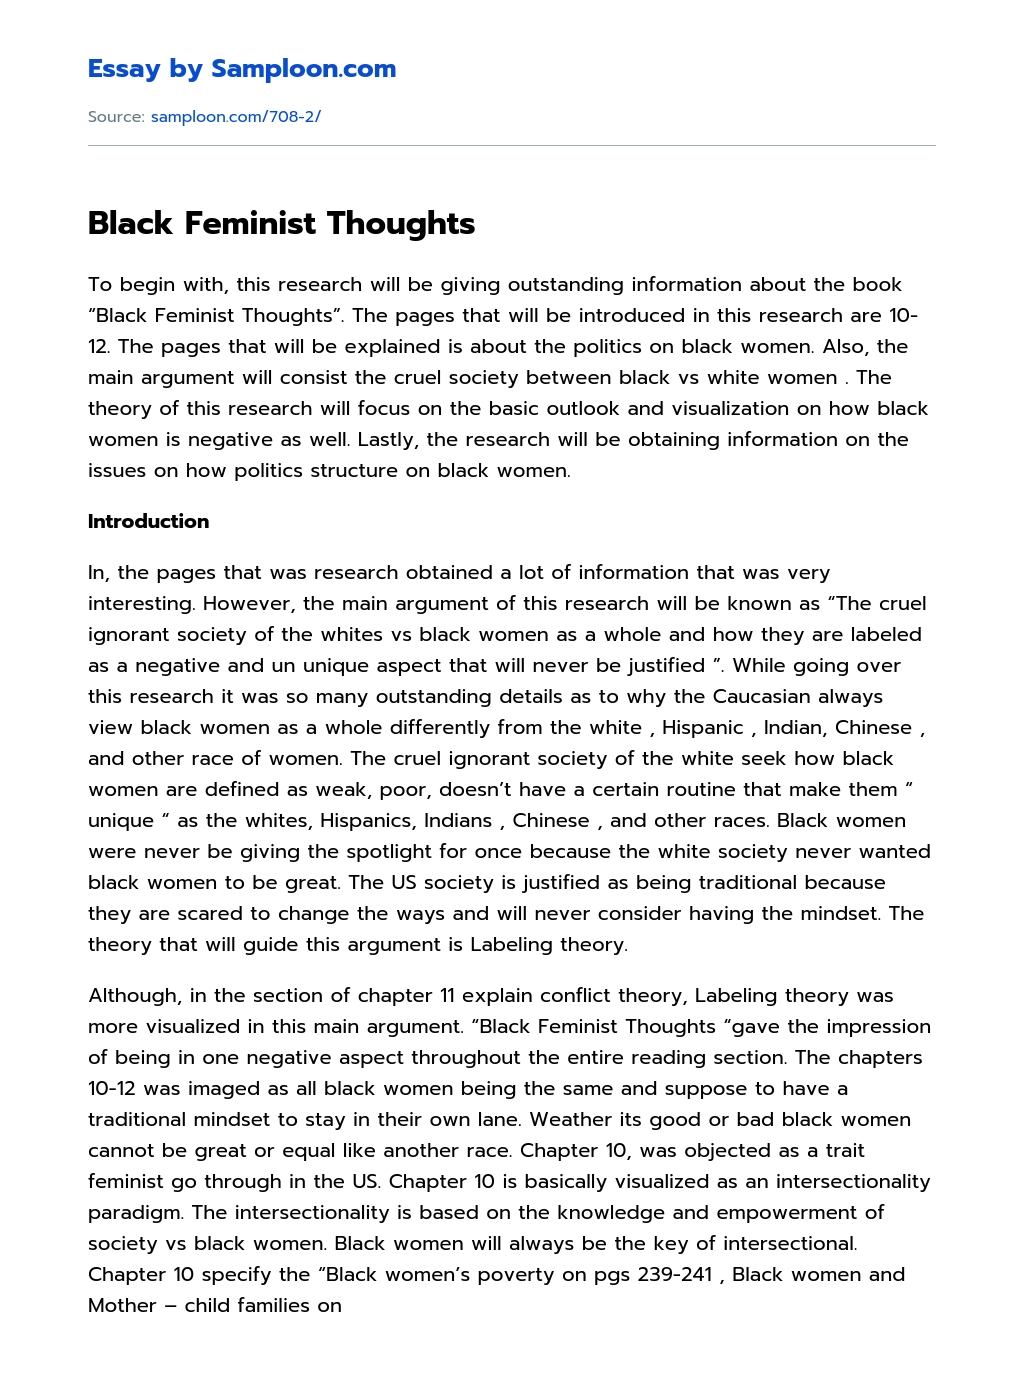 Black Feminist Thoughts essay